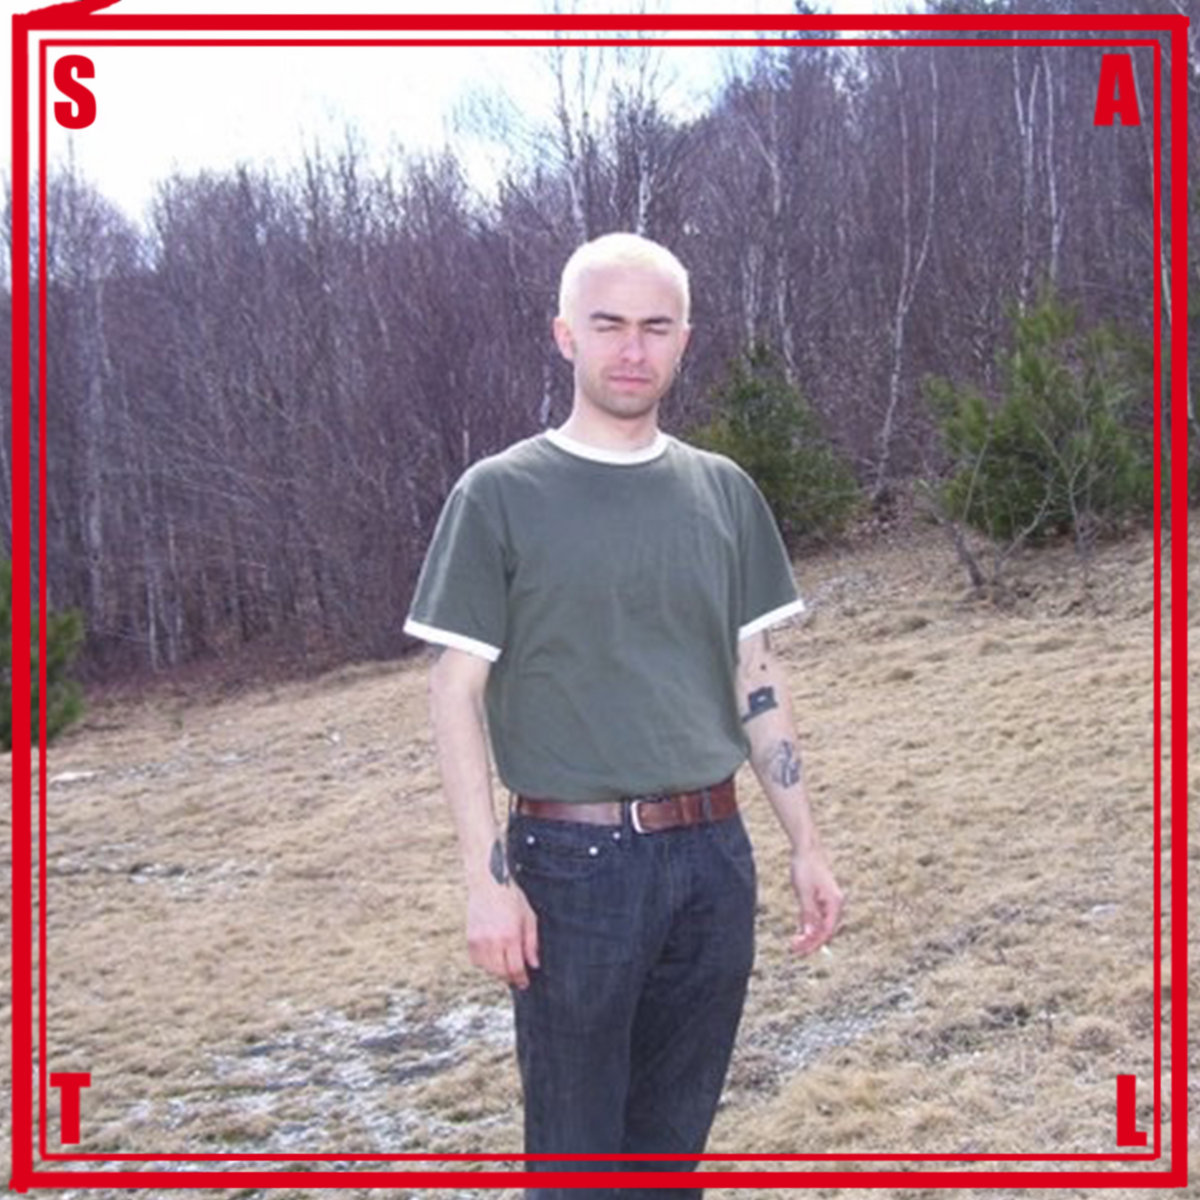 salt self-titled album art - jonathan nankoff standing in front of trees in a green t shirt